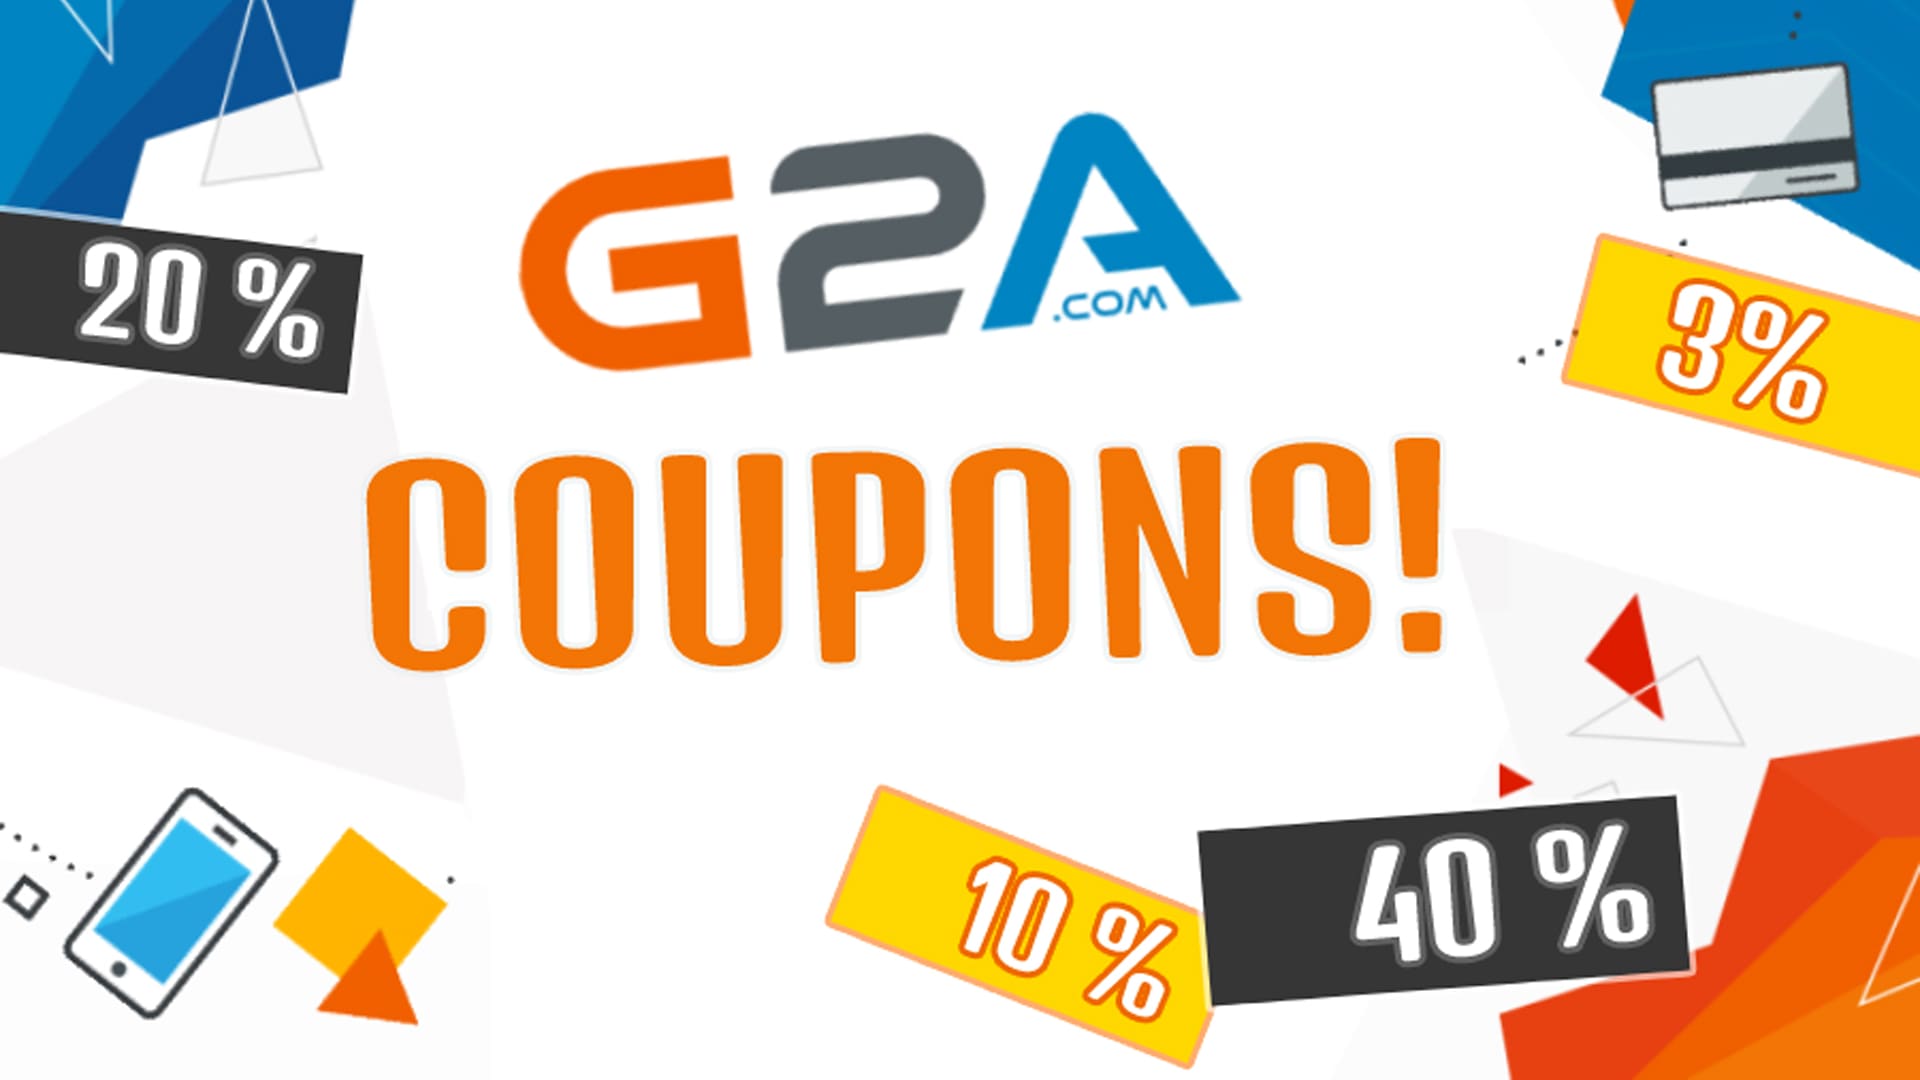 Display of Exclusive Discounts on G2A